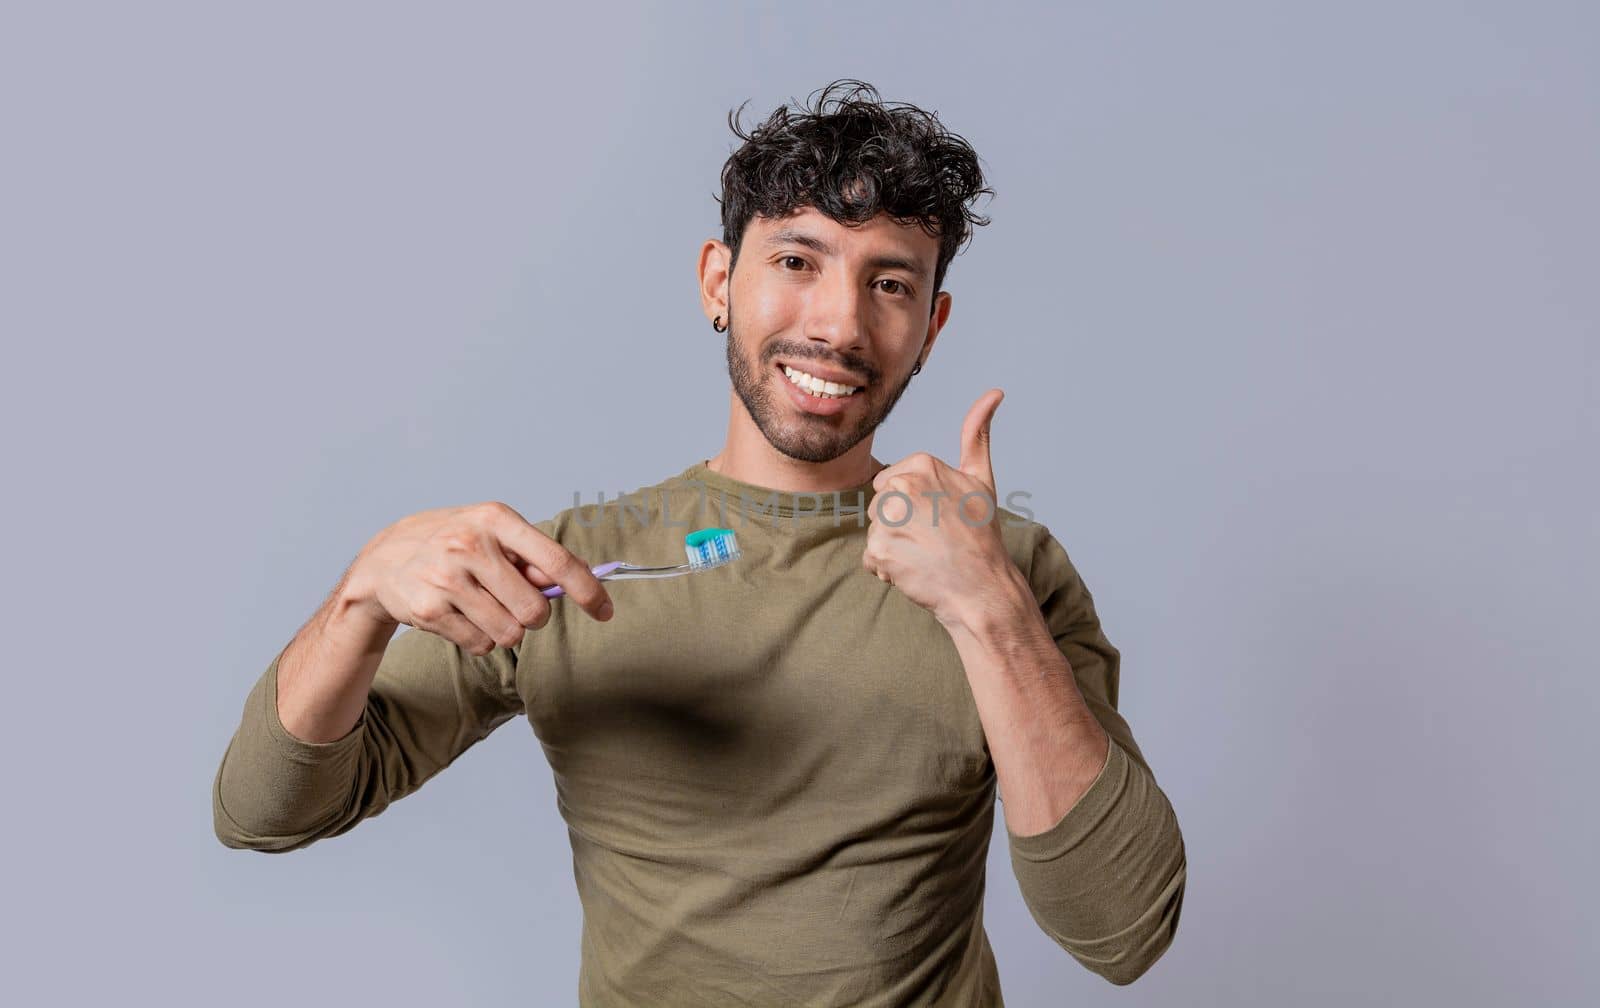 Young man holding a toothbrush with thumb up isolated. Smiling handsome guy holding a toothbrush with thumb up. Smiling people holding toothbrush with thumbs up gesture by isaiphoto